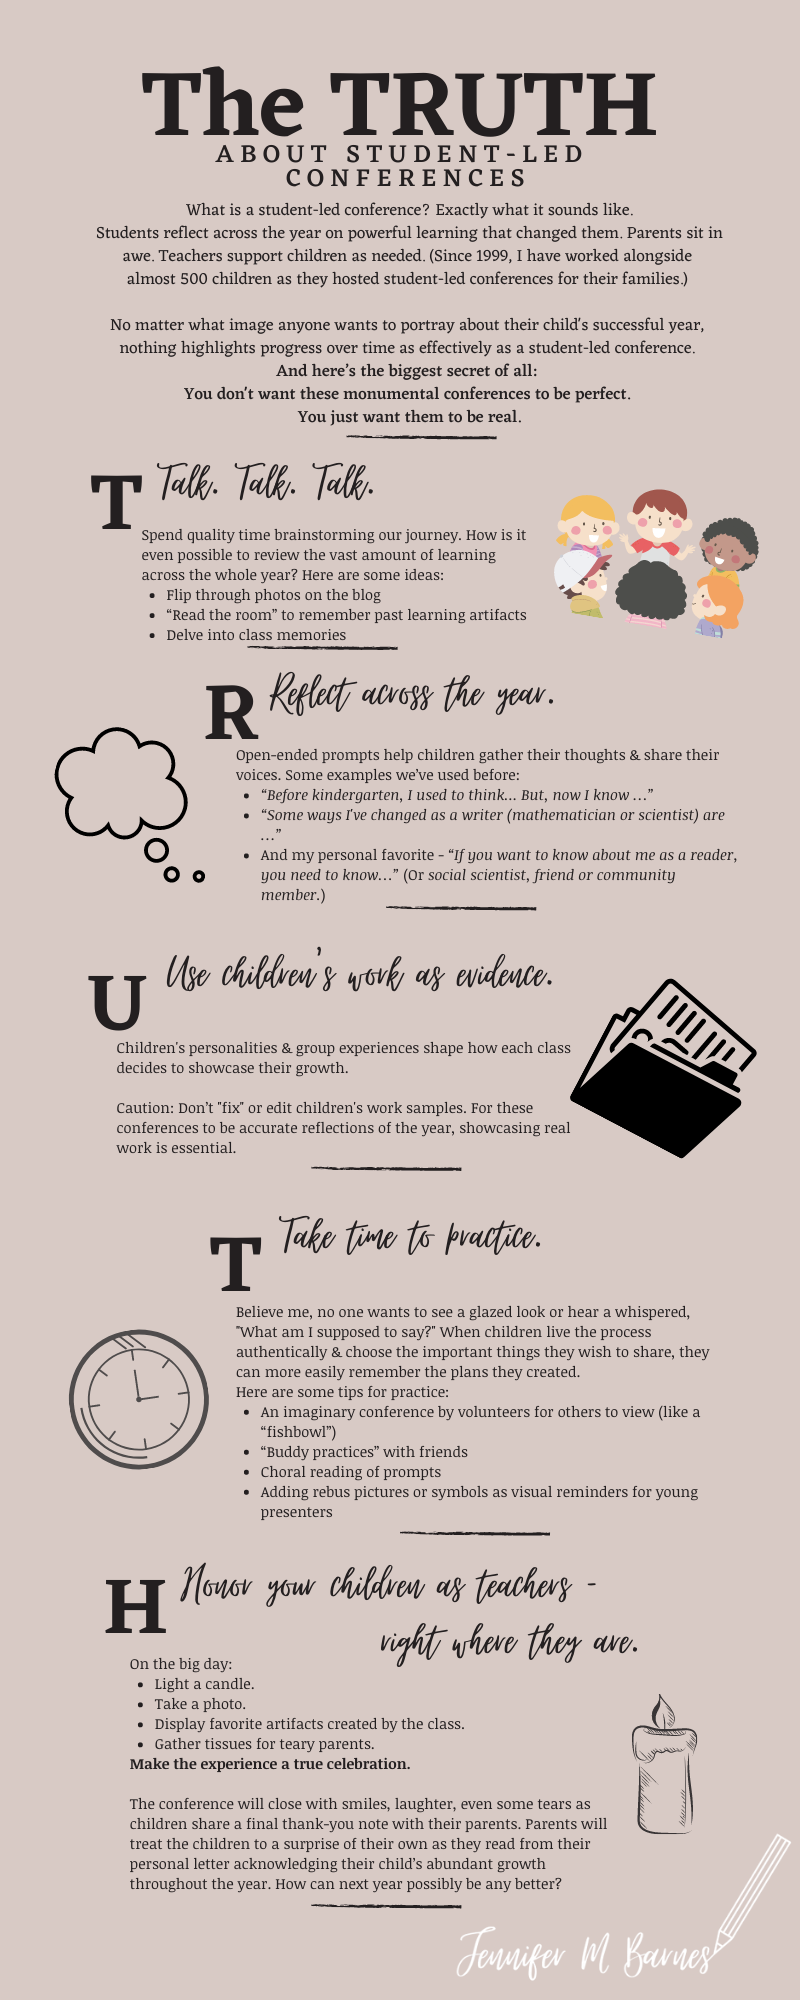 Extensive infographic detailing components of student led conferences using an acronym: T talk; R reflect across the year; U use children's work as evidence; T take time to practice; H honor kids where they are.